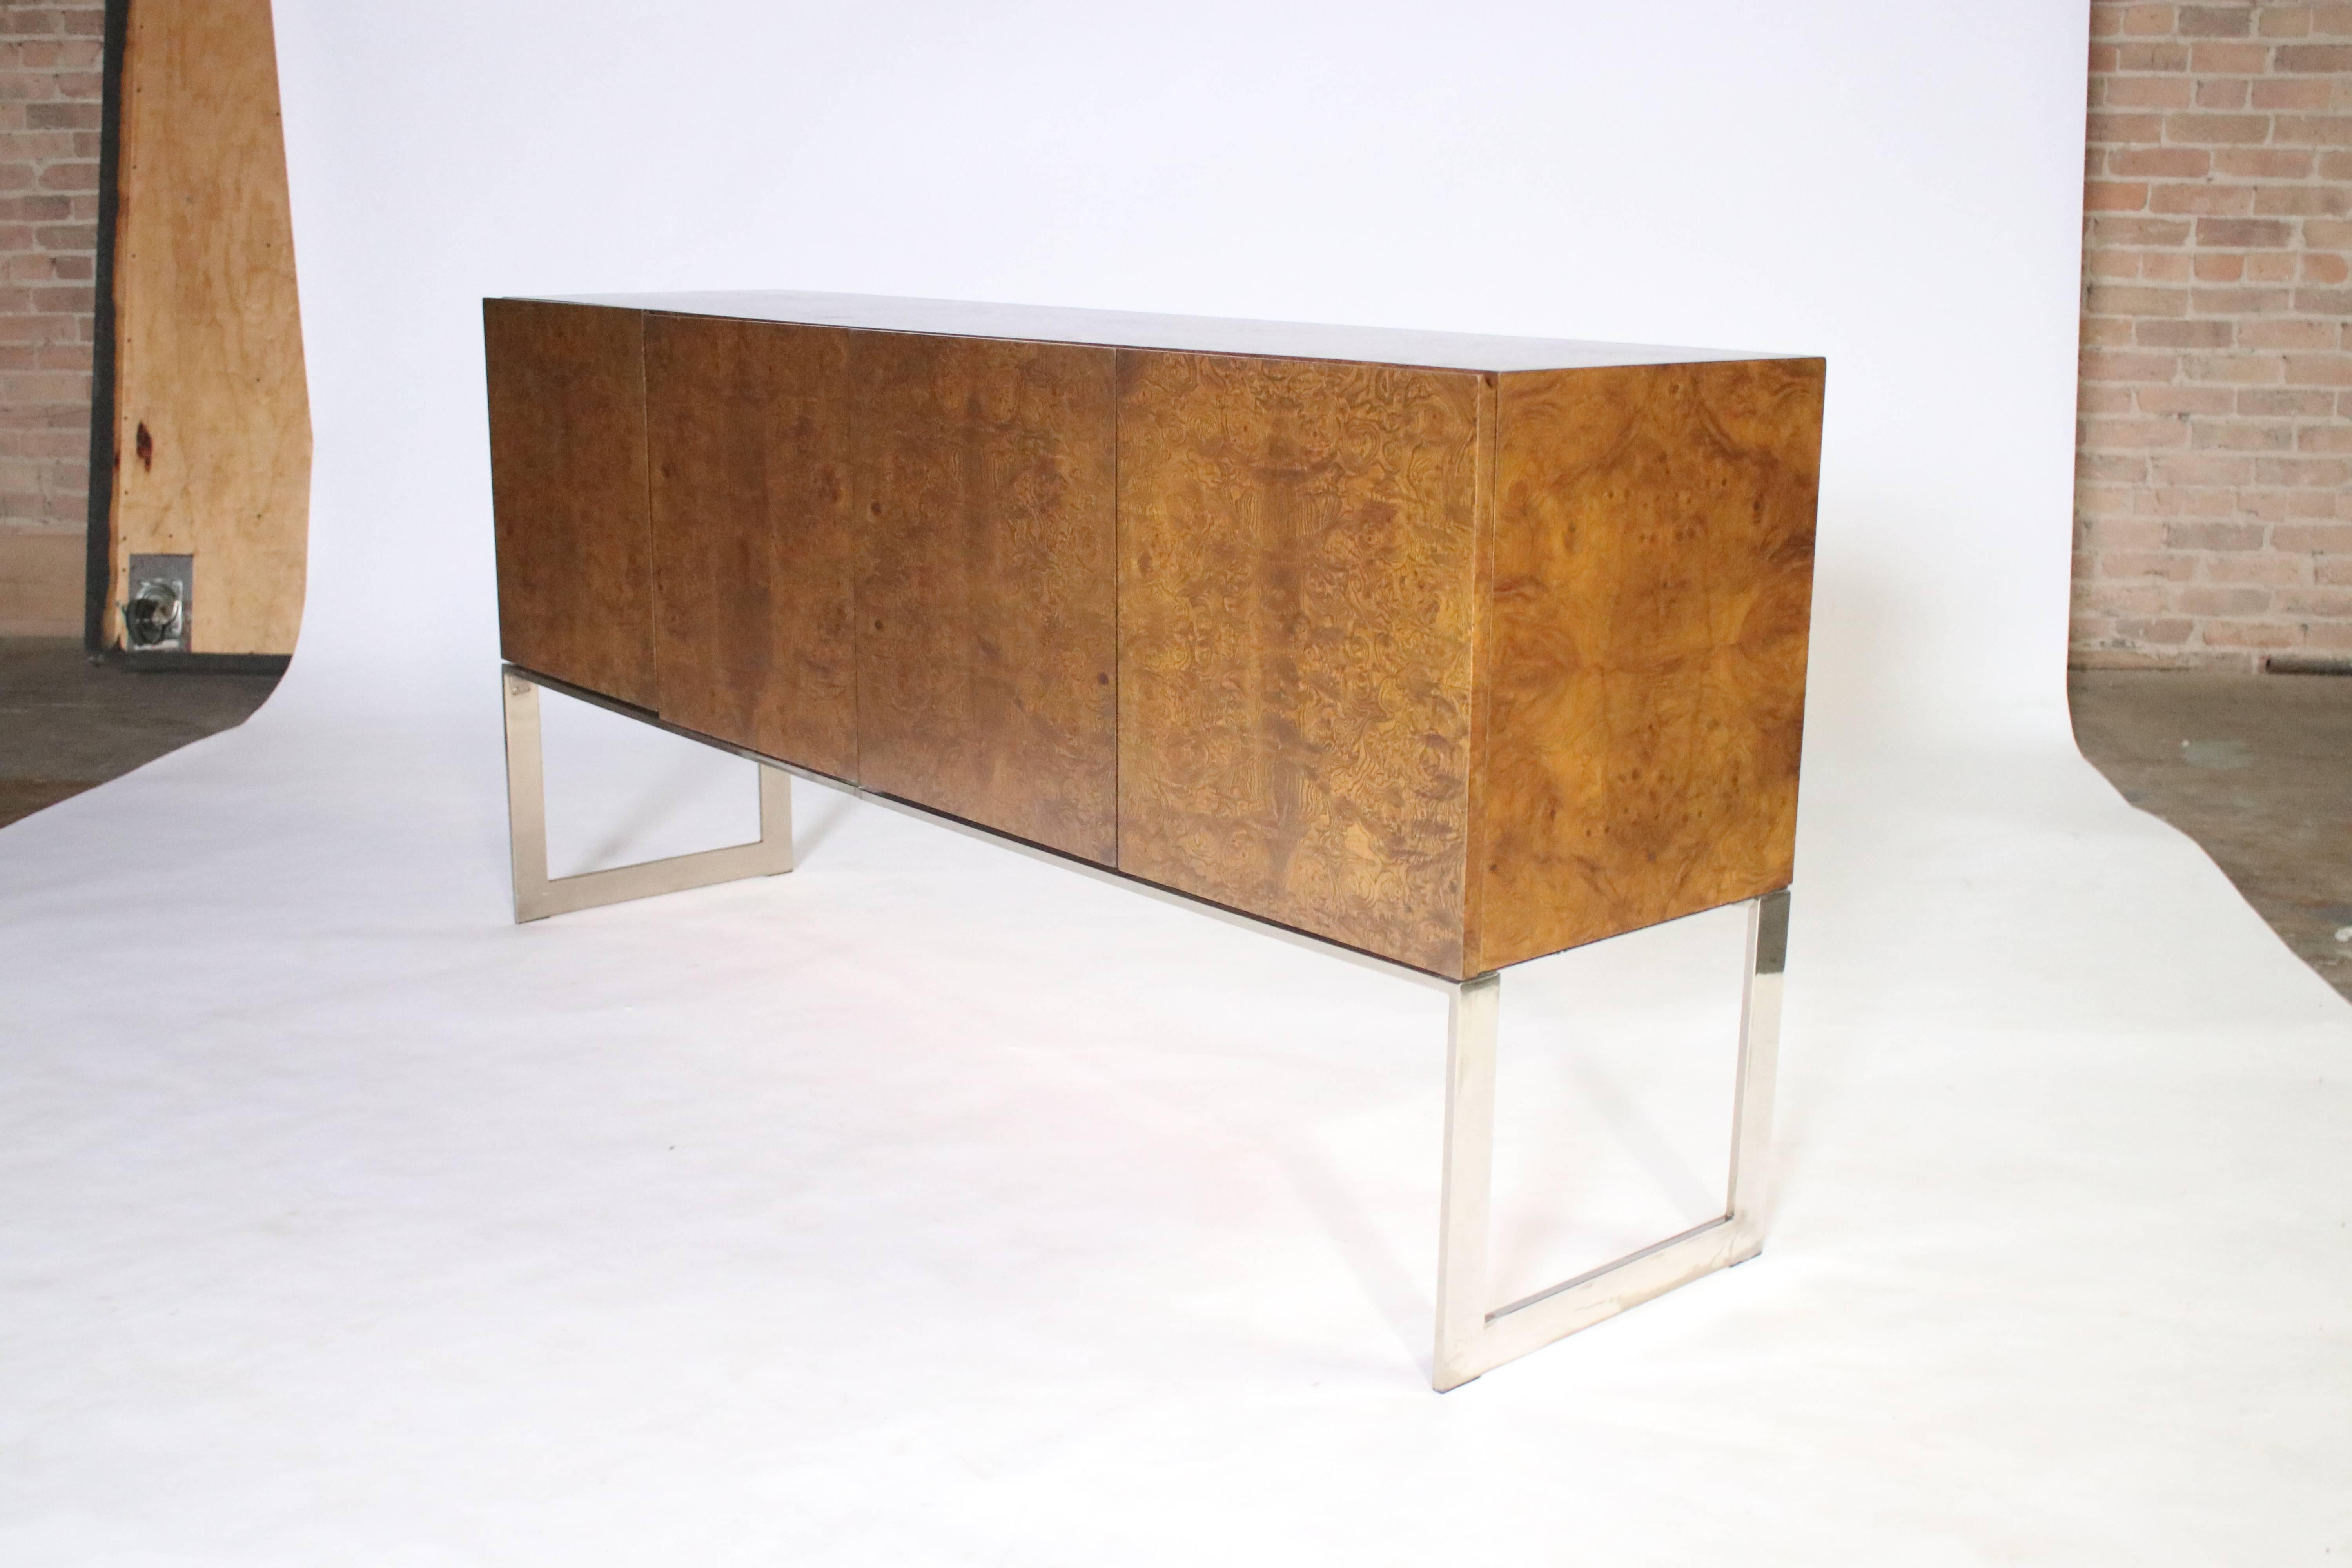 Milo Baughman for Thayer Coggin walnut burl wood credenza on polished chrome steel sled legs. Four cabinets open to a glass and a wood shelf on the left side and two pull-out drawers with felt lining for cutlery and silverware on the right side.